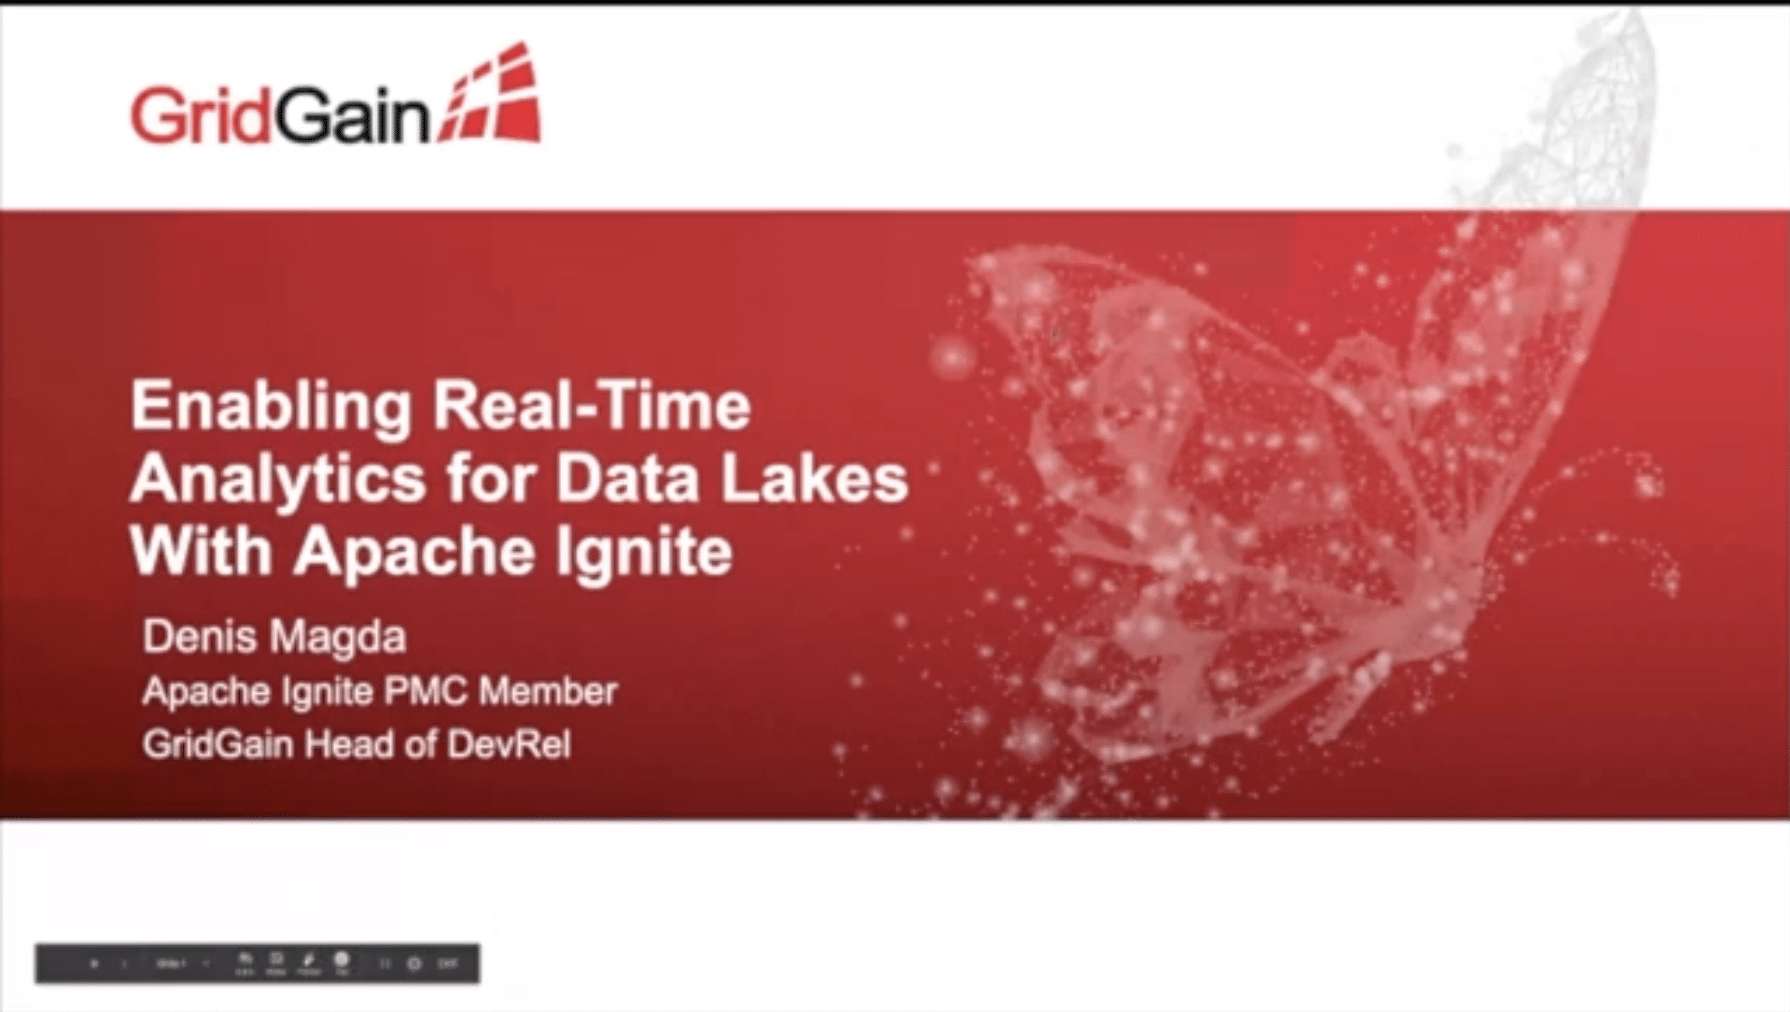 Enabling Real-Time Analytics for Data Lakes with Apache Ignite